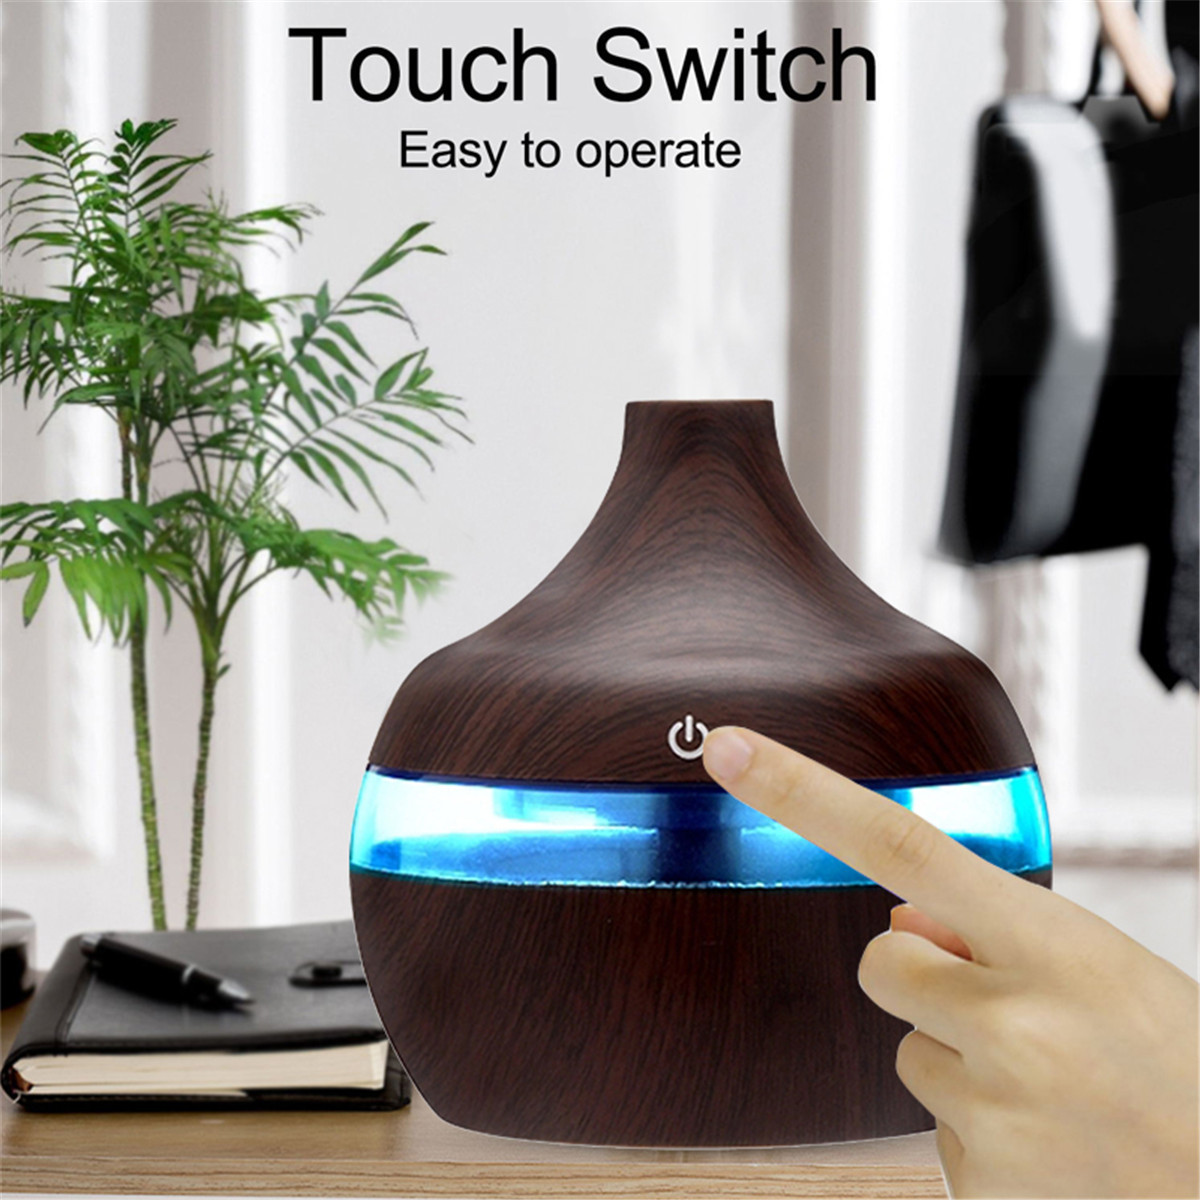 300ml-Electric-Ultrasonic-Air-Mist-Humidifier-Purifier-Aroma-Diffuser-7-Colors-LED-USB-Charging-for--1761154-3